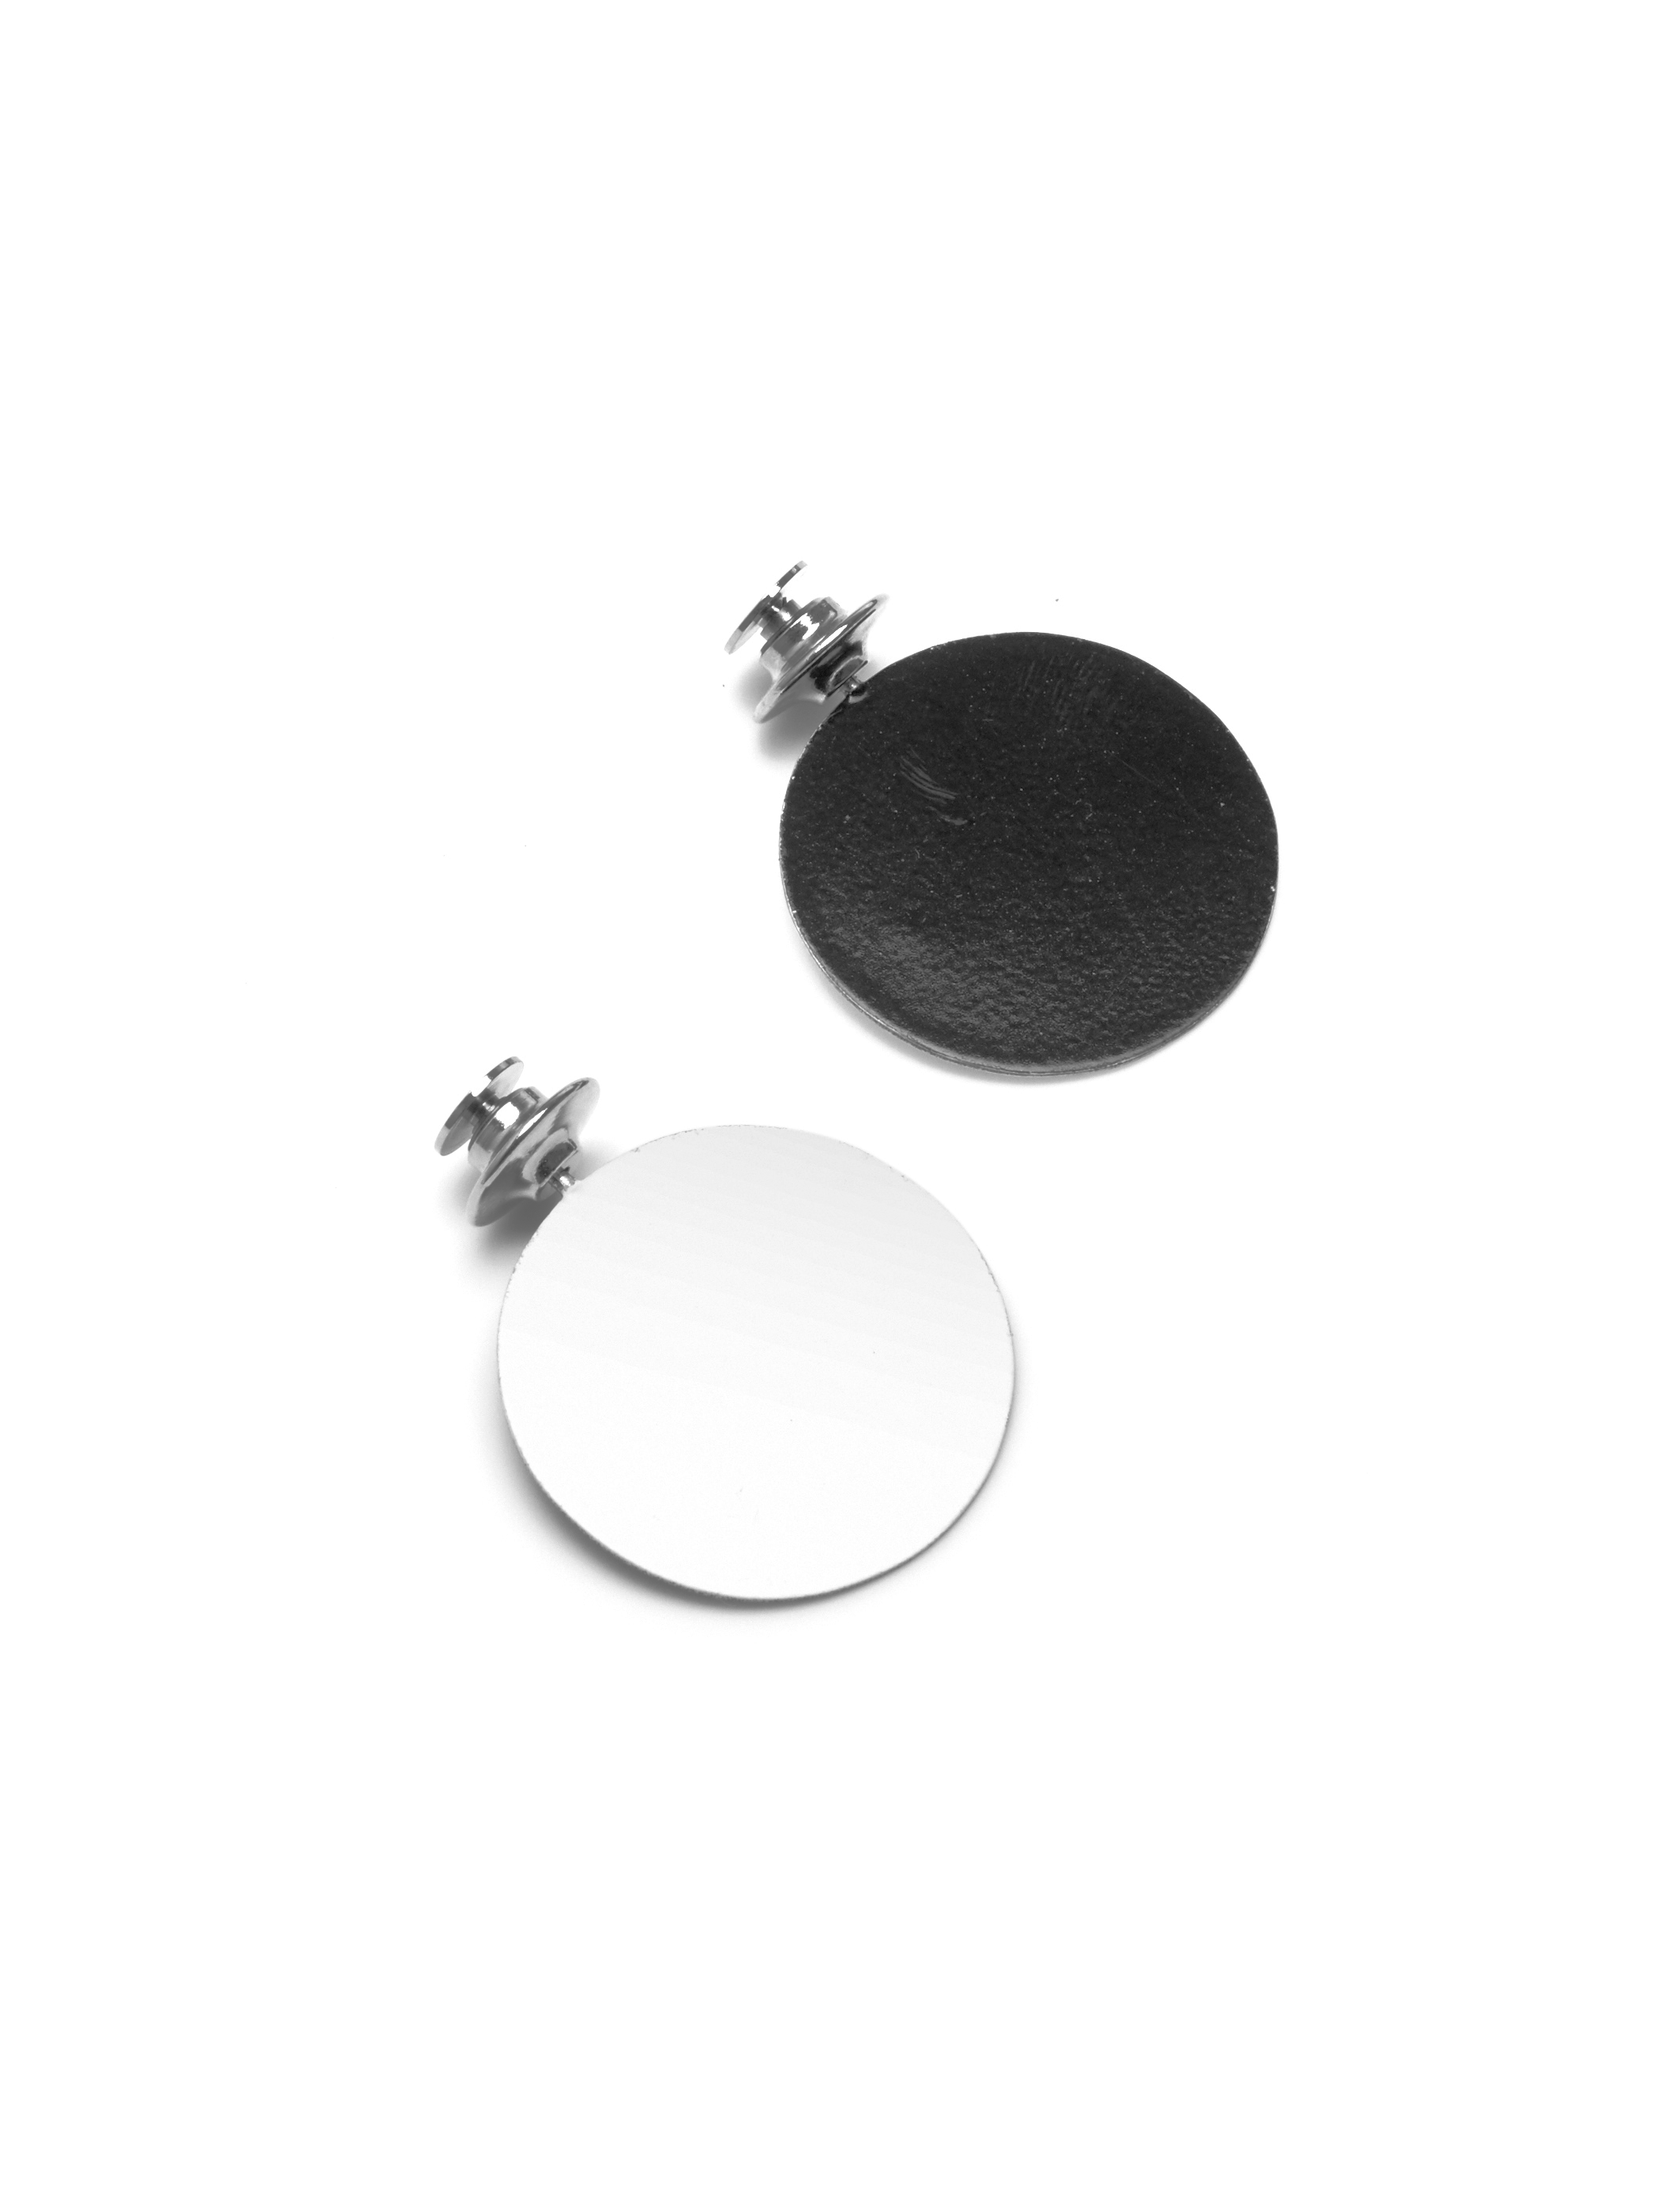 Marc Monzo pin (black and white)